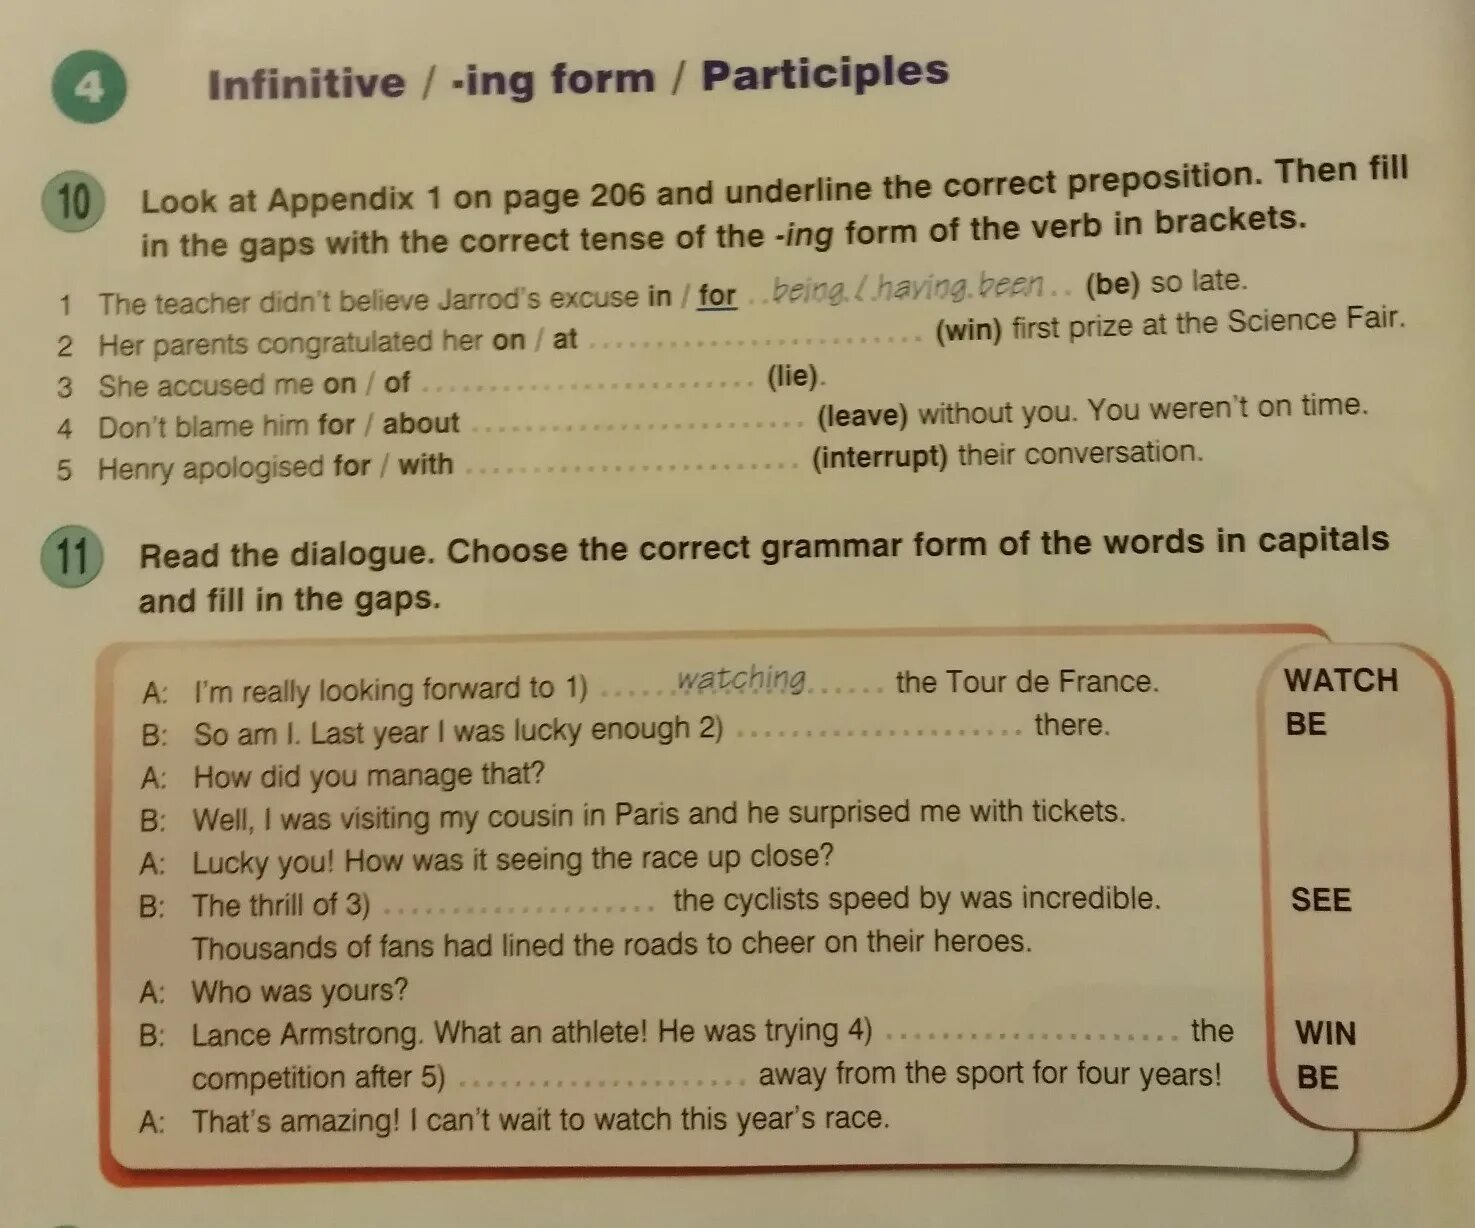 Complete the dialogue with the words. Infinitive ing form participles 4 ответы. Infinitive ing form participles. Unit 2 Infinitive the ing form too enough participles ответы. Fill in the correct preposition ответы.